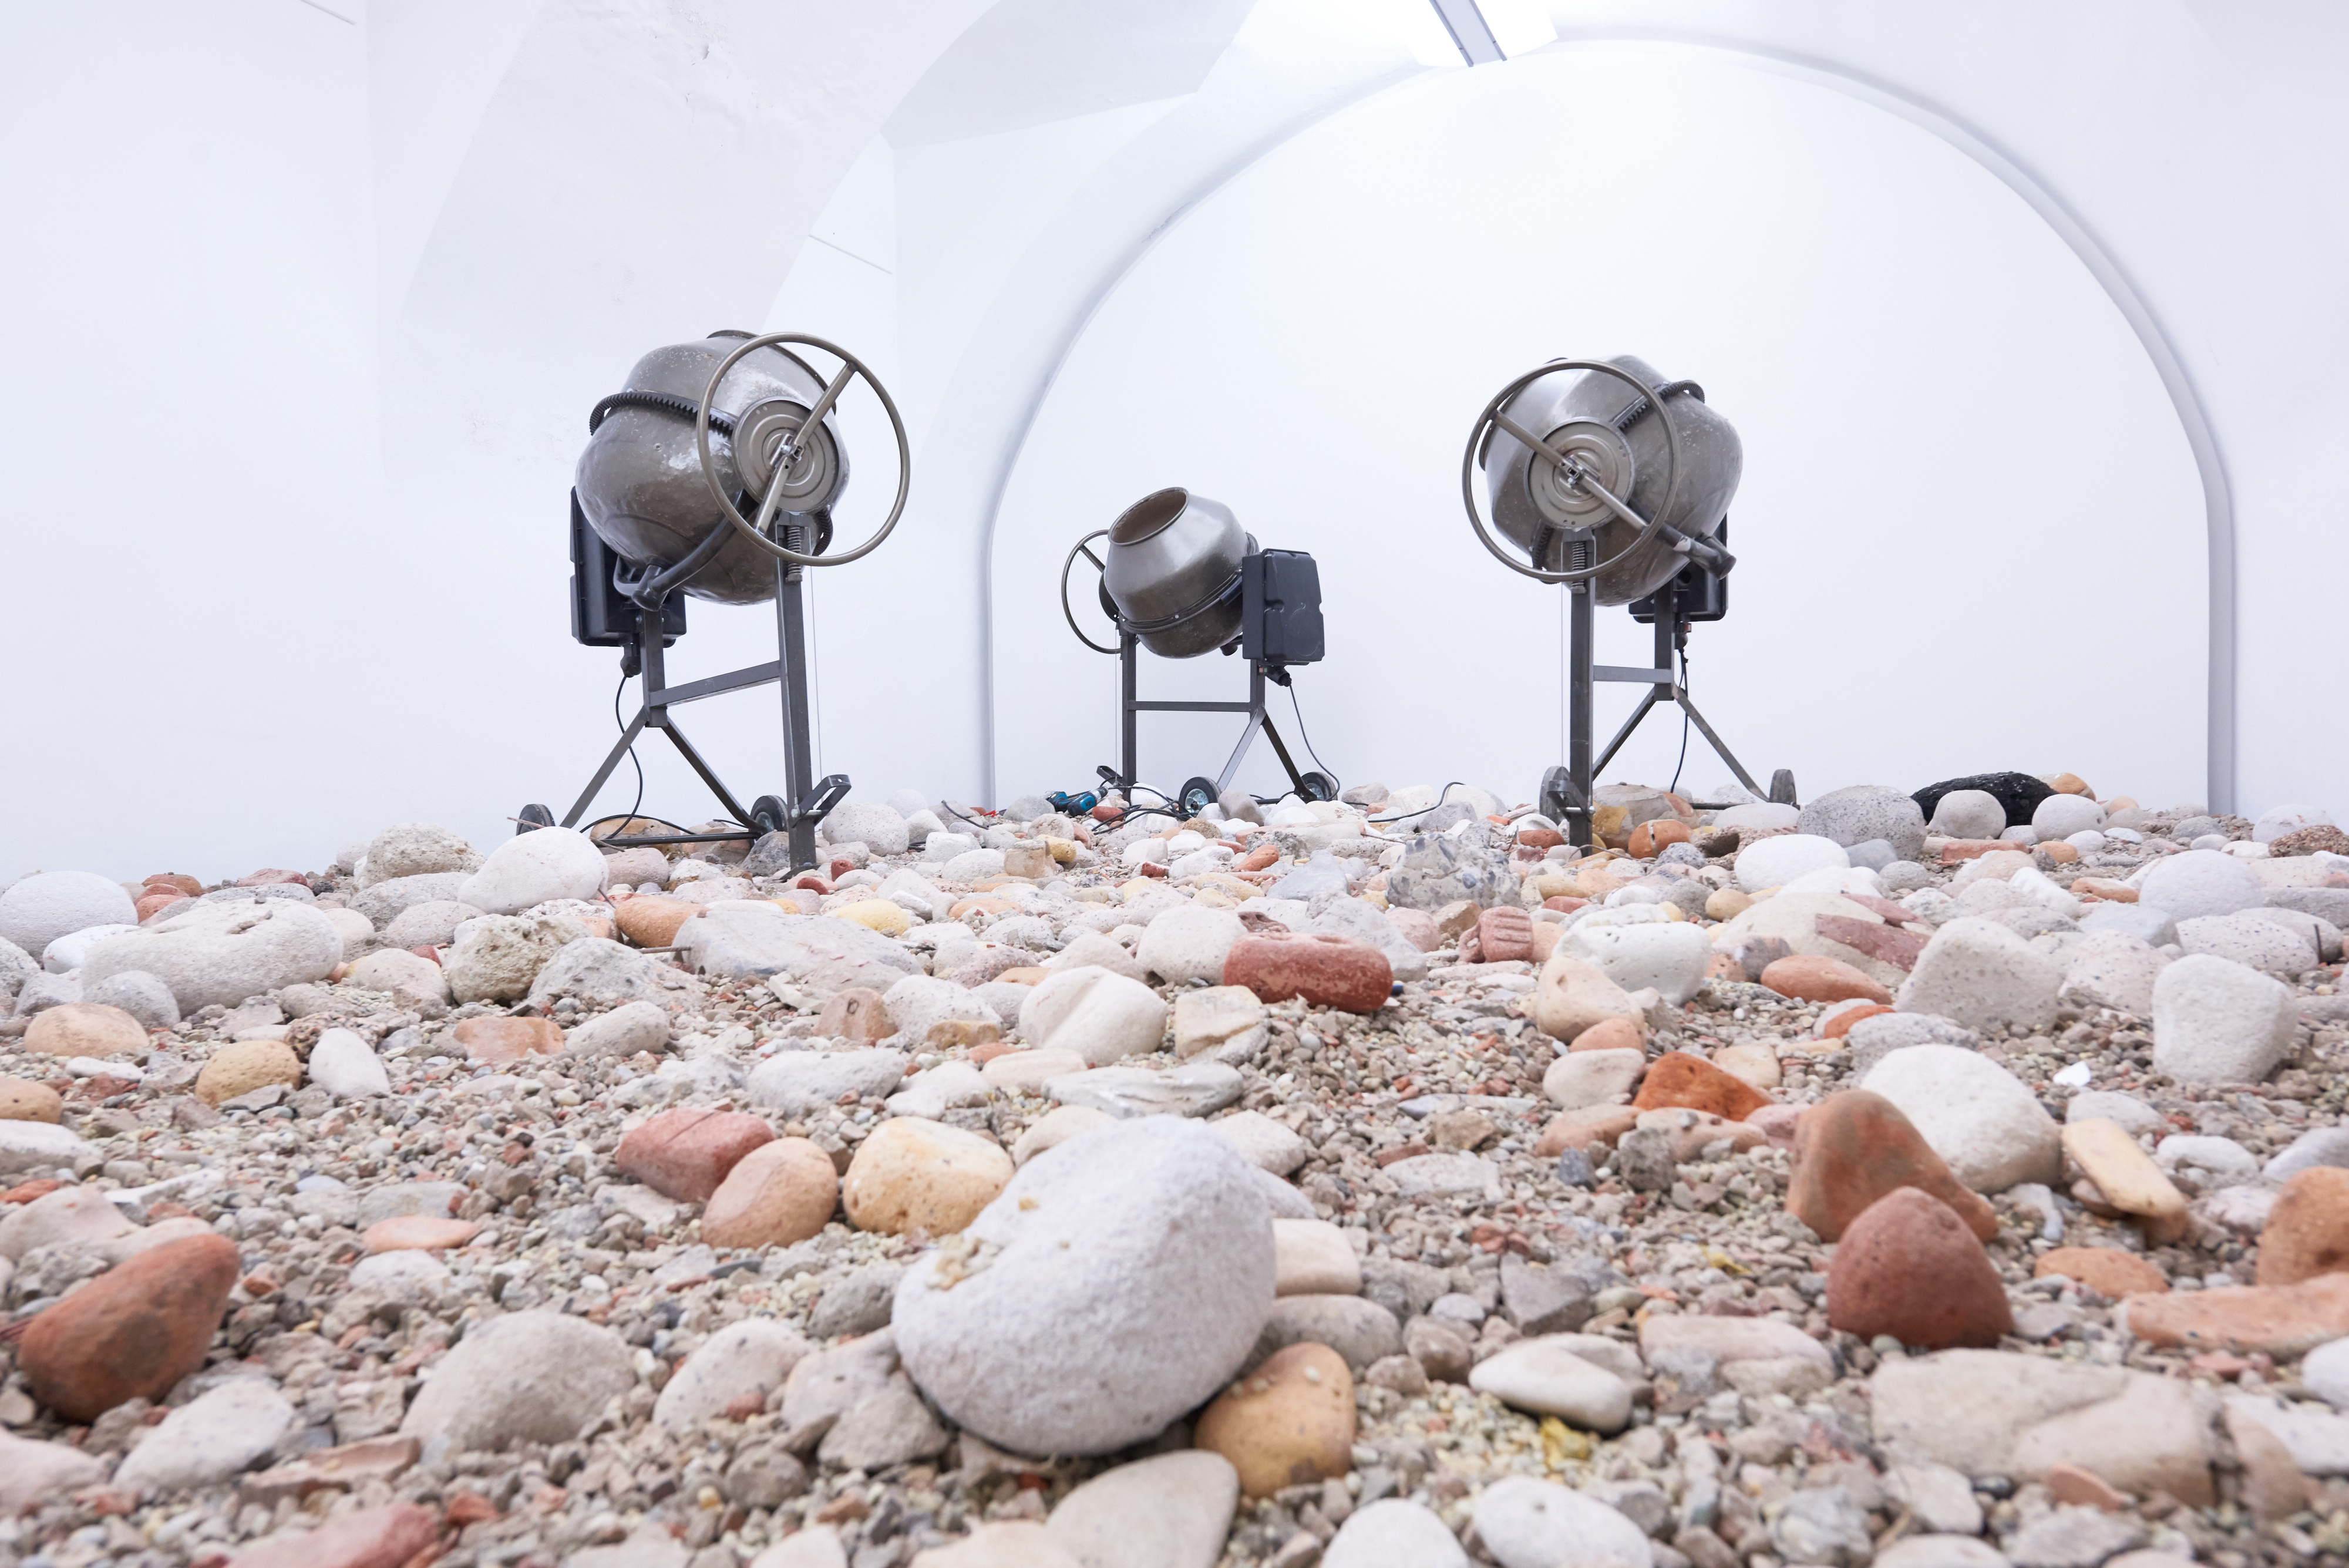 View of the work Clockwork by artists Julius von Bismarck, which consists of three concrete mixers that incessantly hurl stones. These stones cover the entire floor.